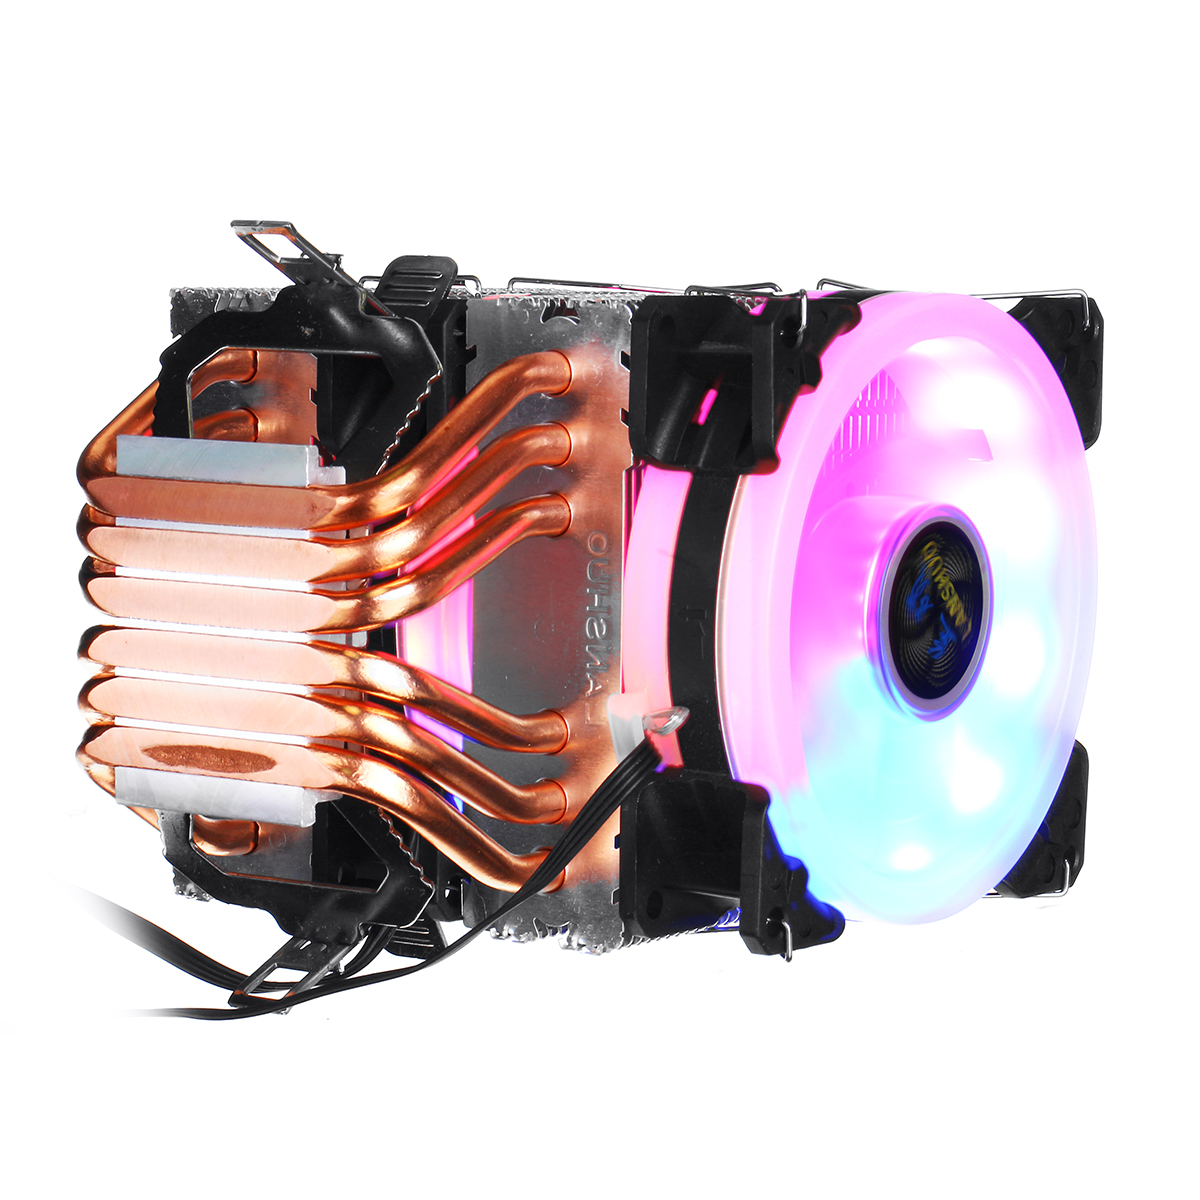 CPU-Cooler-LED-RGB-6-Heatpipes-4-Pin-Dual-Fan-For-Intel-115611551151775-AMD-1761052-4